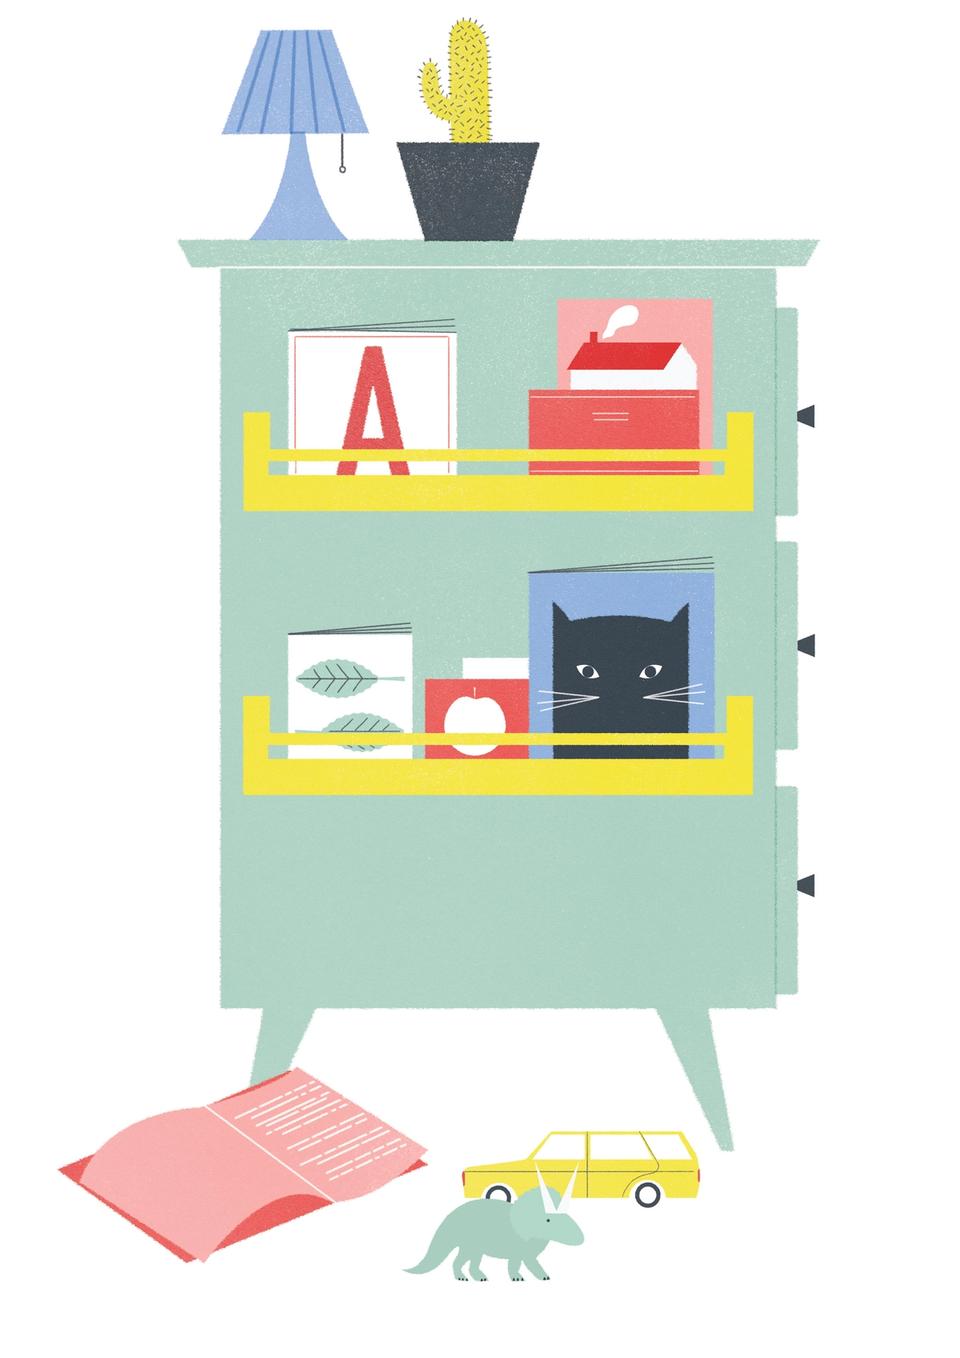 Illustration of dresser in mid-century style with children's books on side, toys on floor and lamp on top